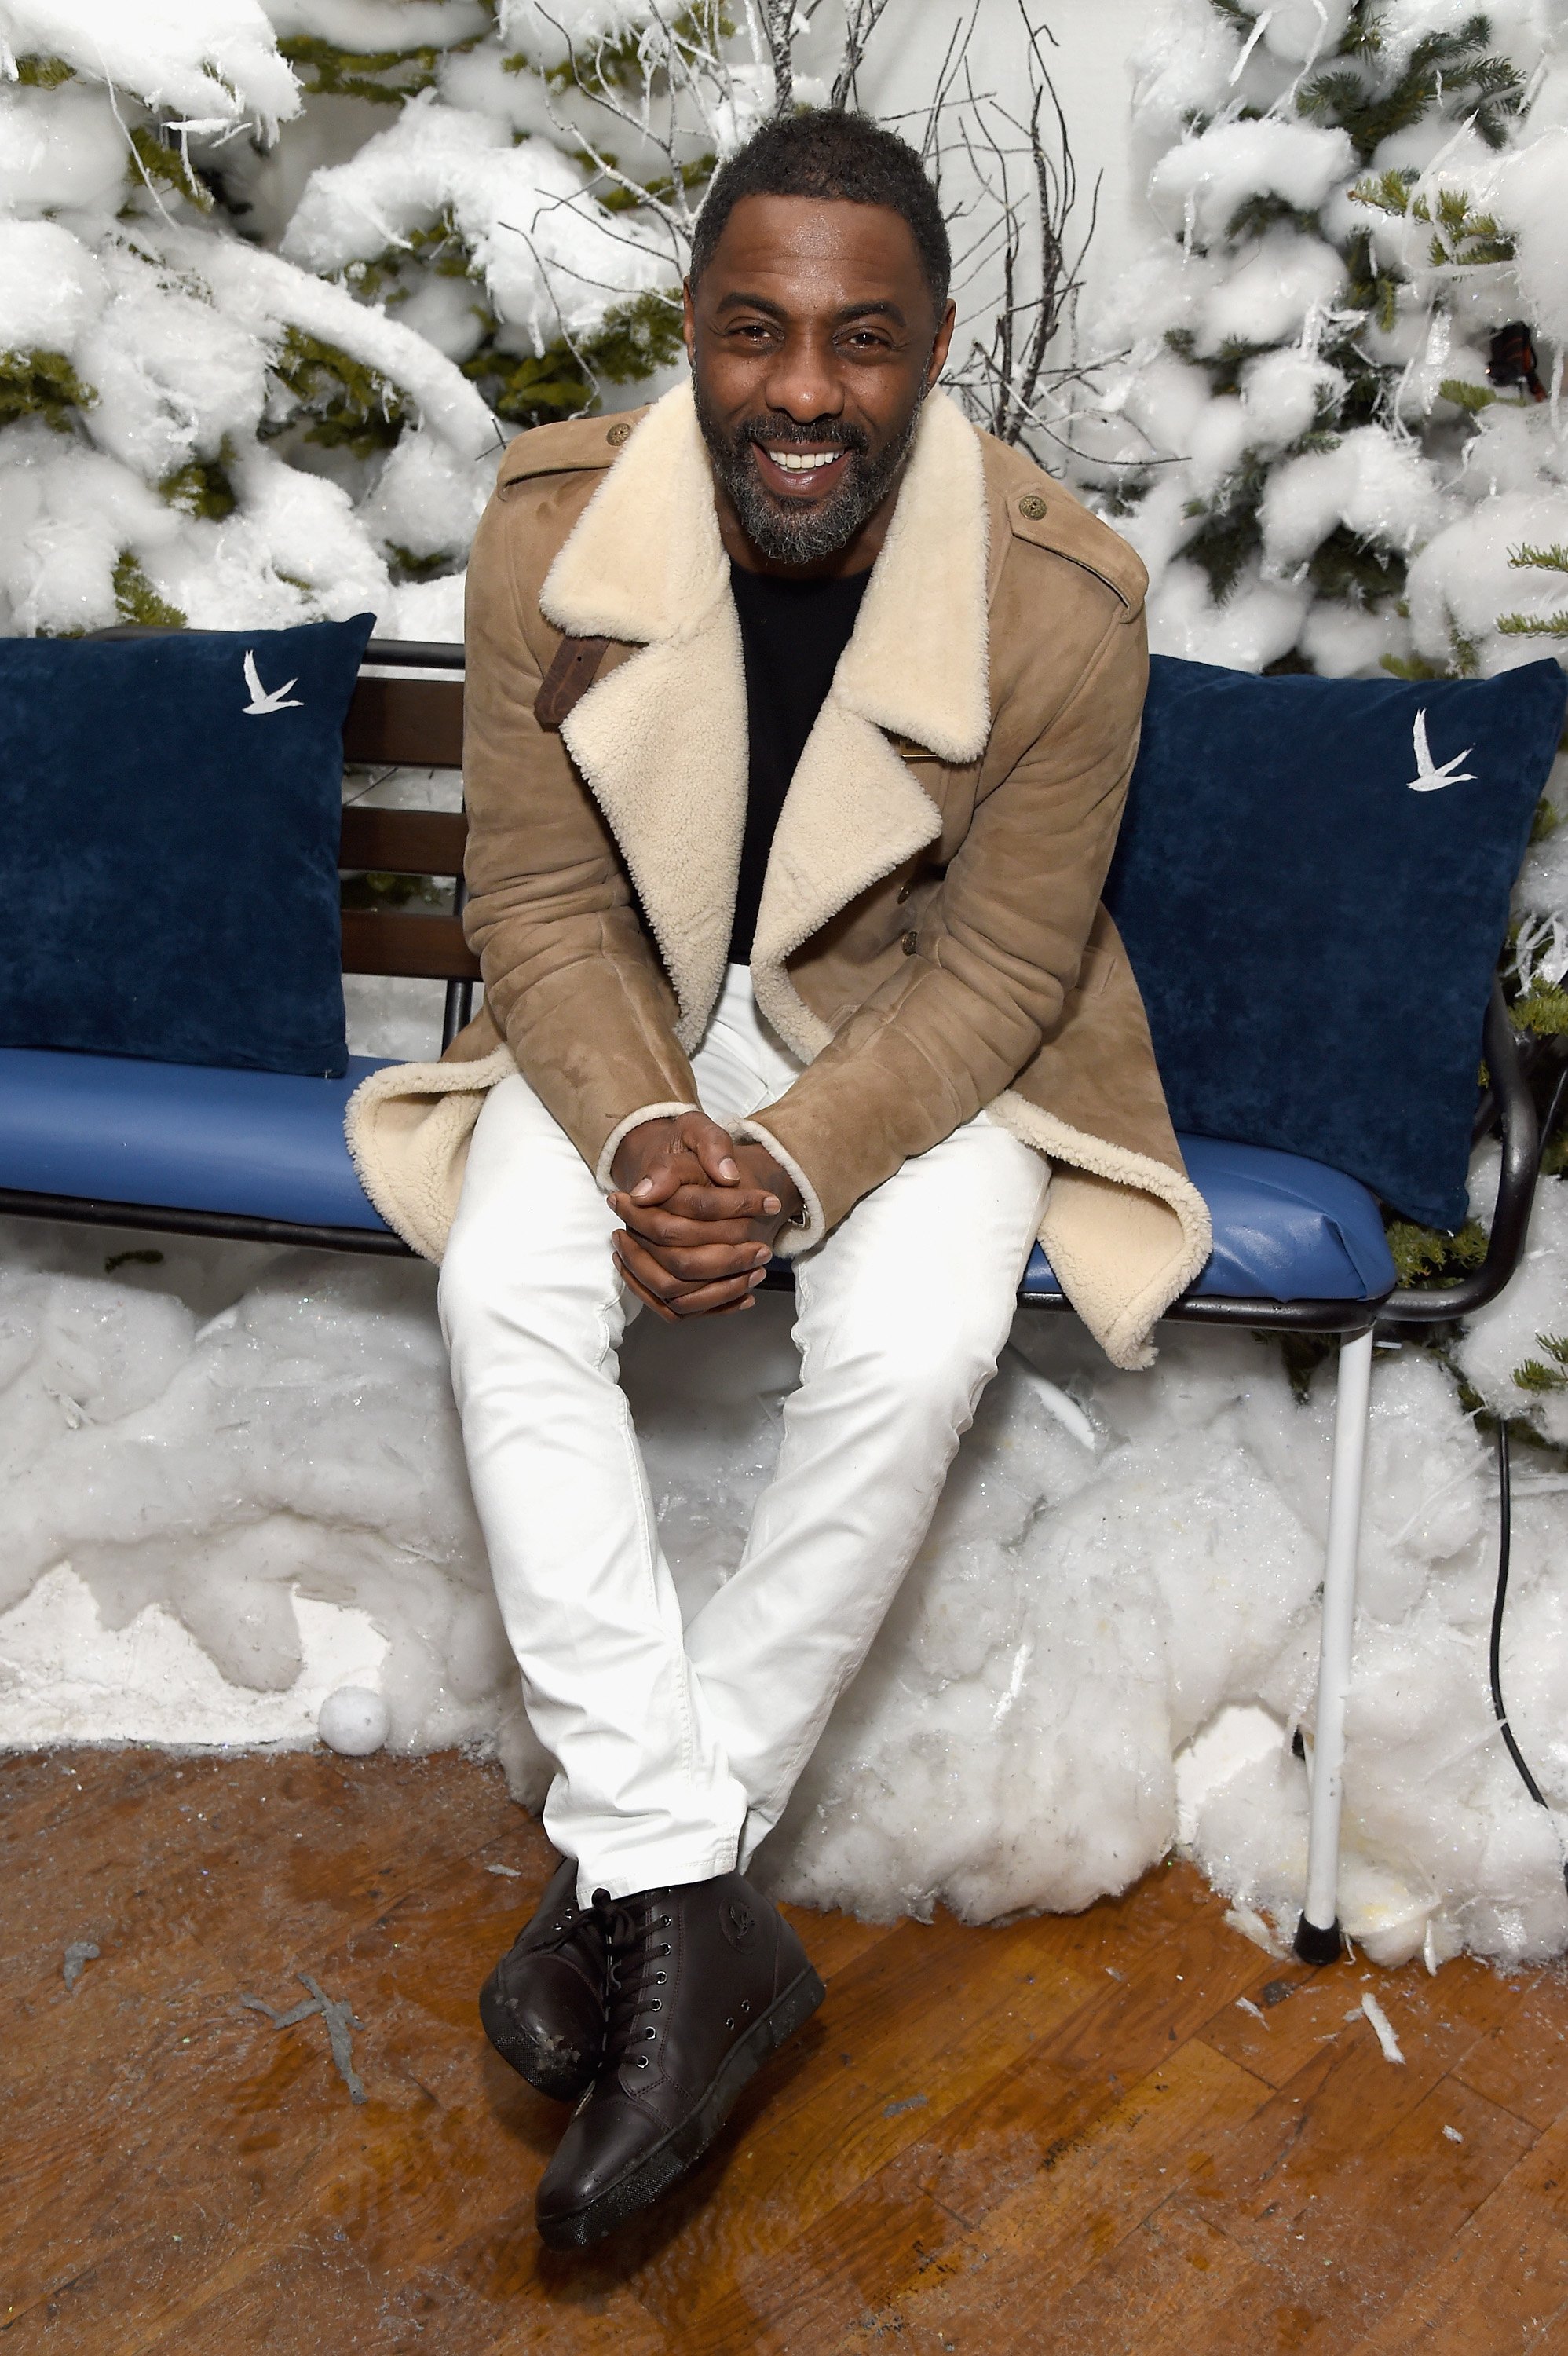 Idris Elba attends an After Party for "Yardie" in Park City, Utah on January 20, 2018 | Photo: Getty Images